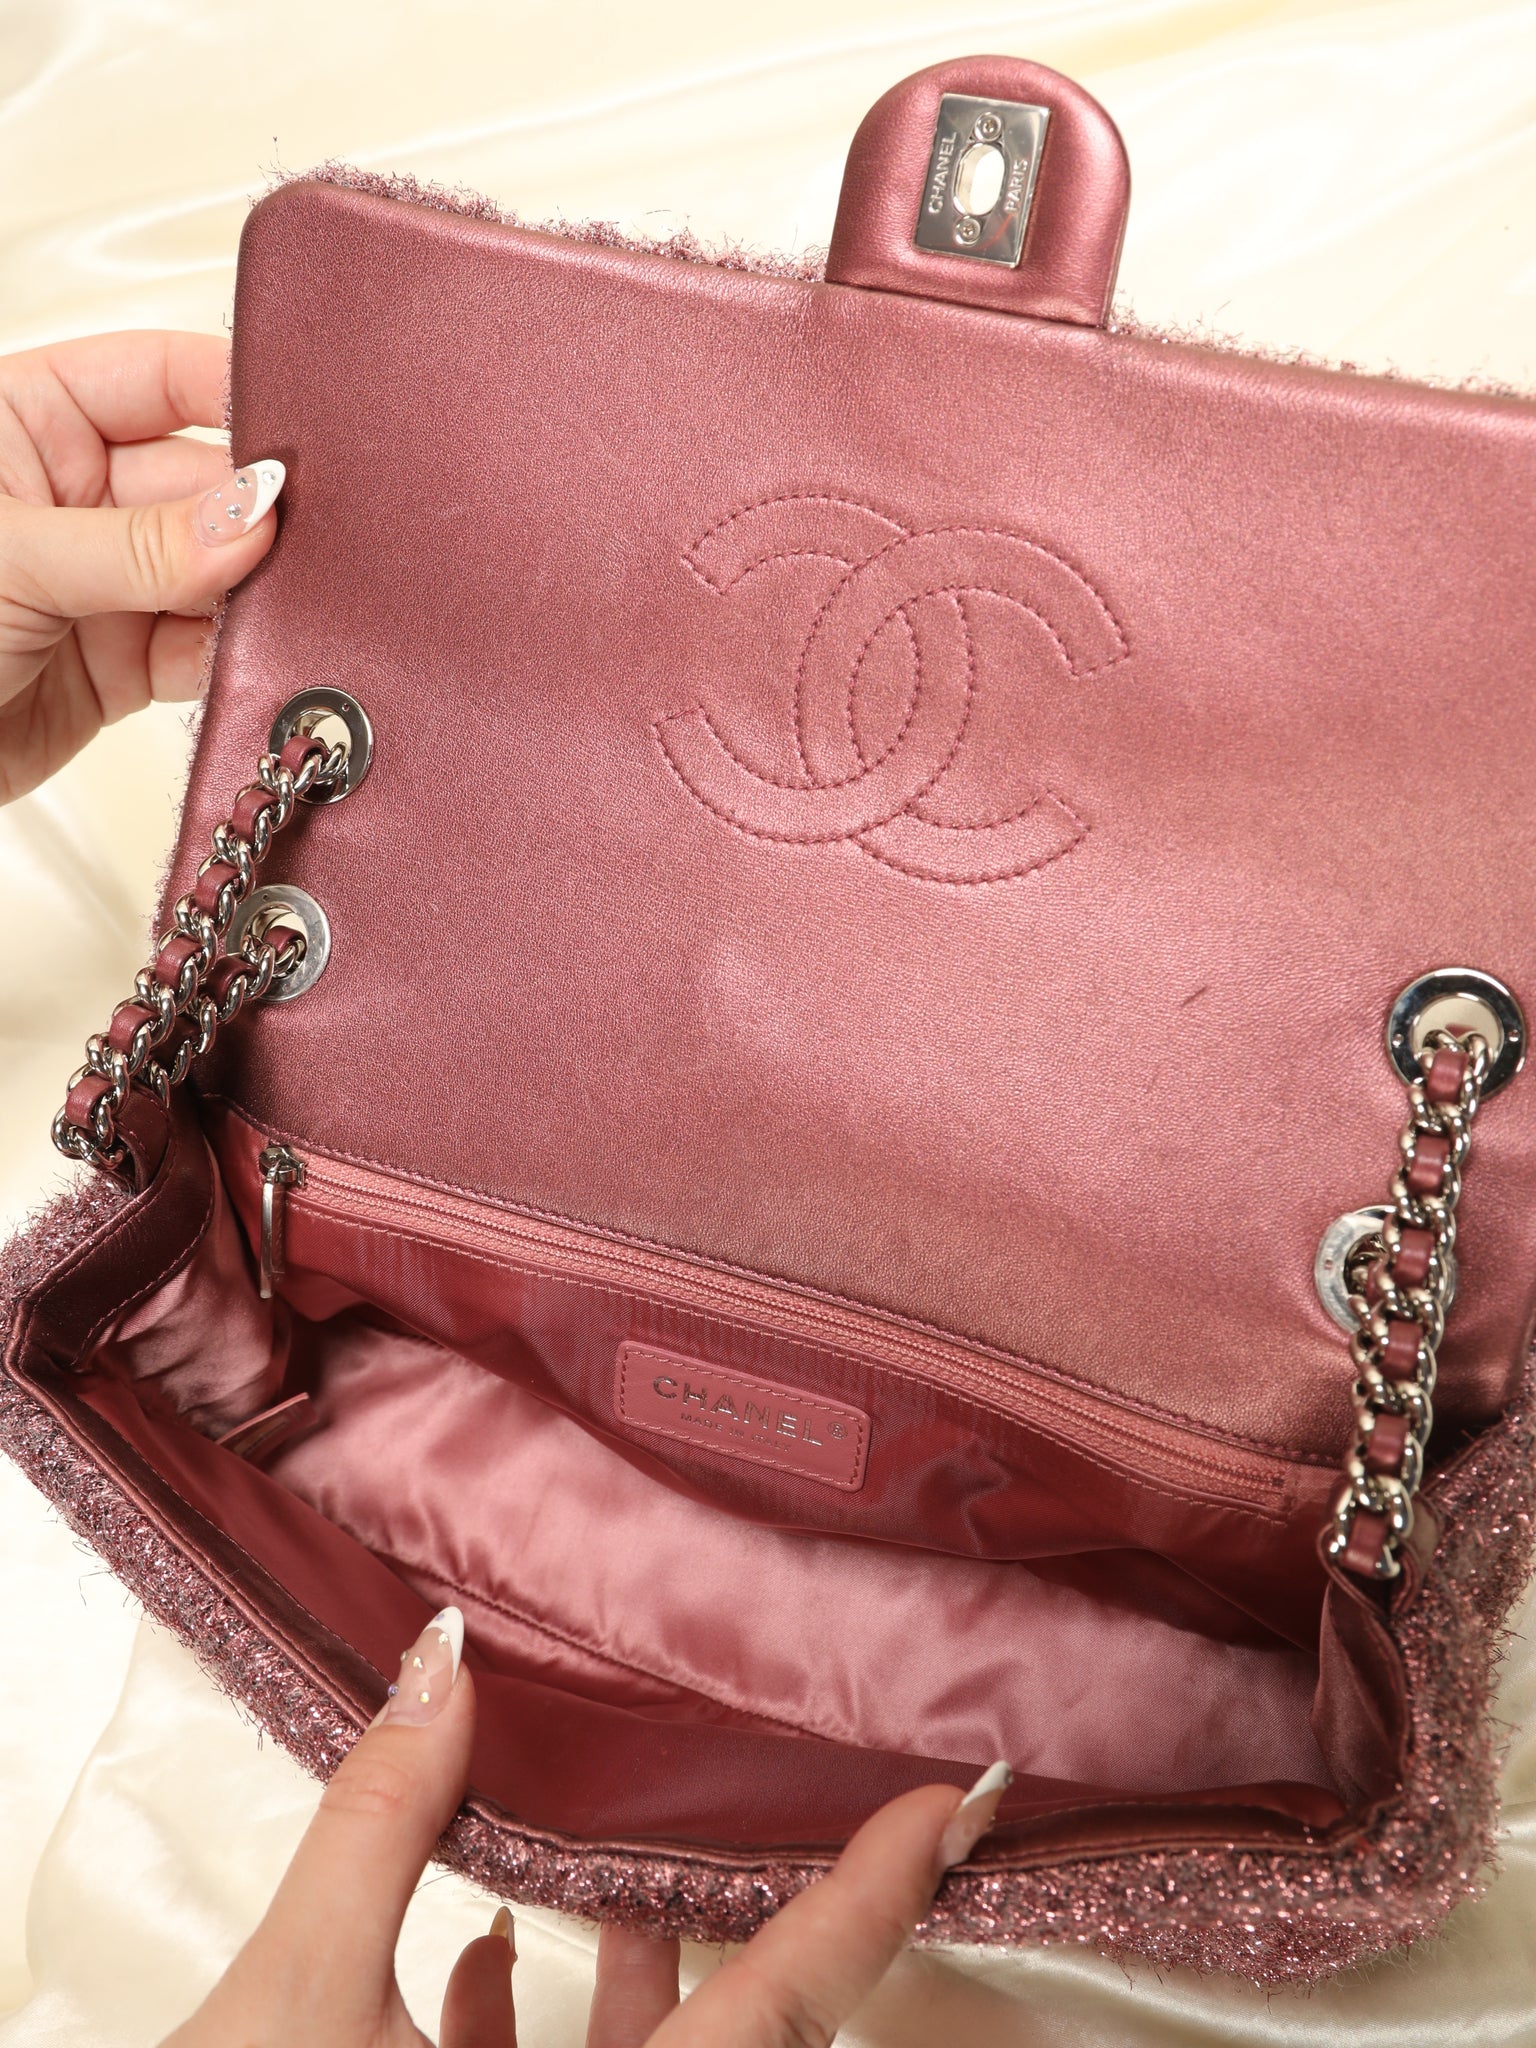 Rare Chanel Quilted Glitzy Flap Bag